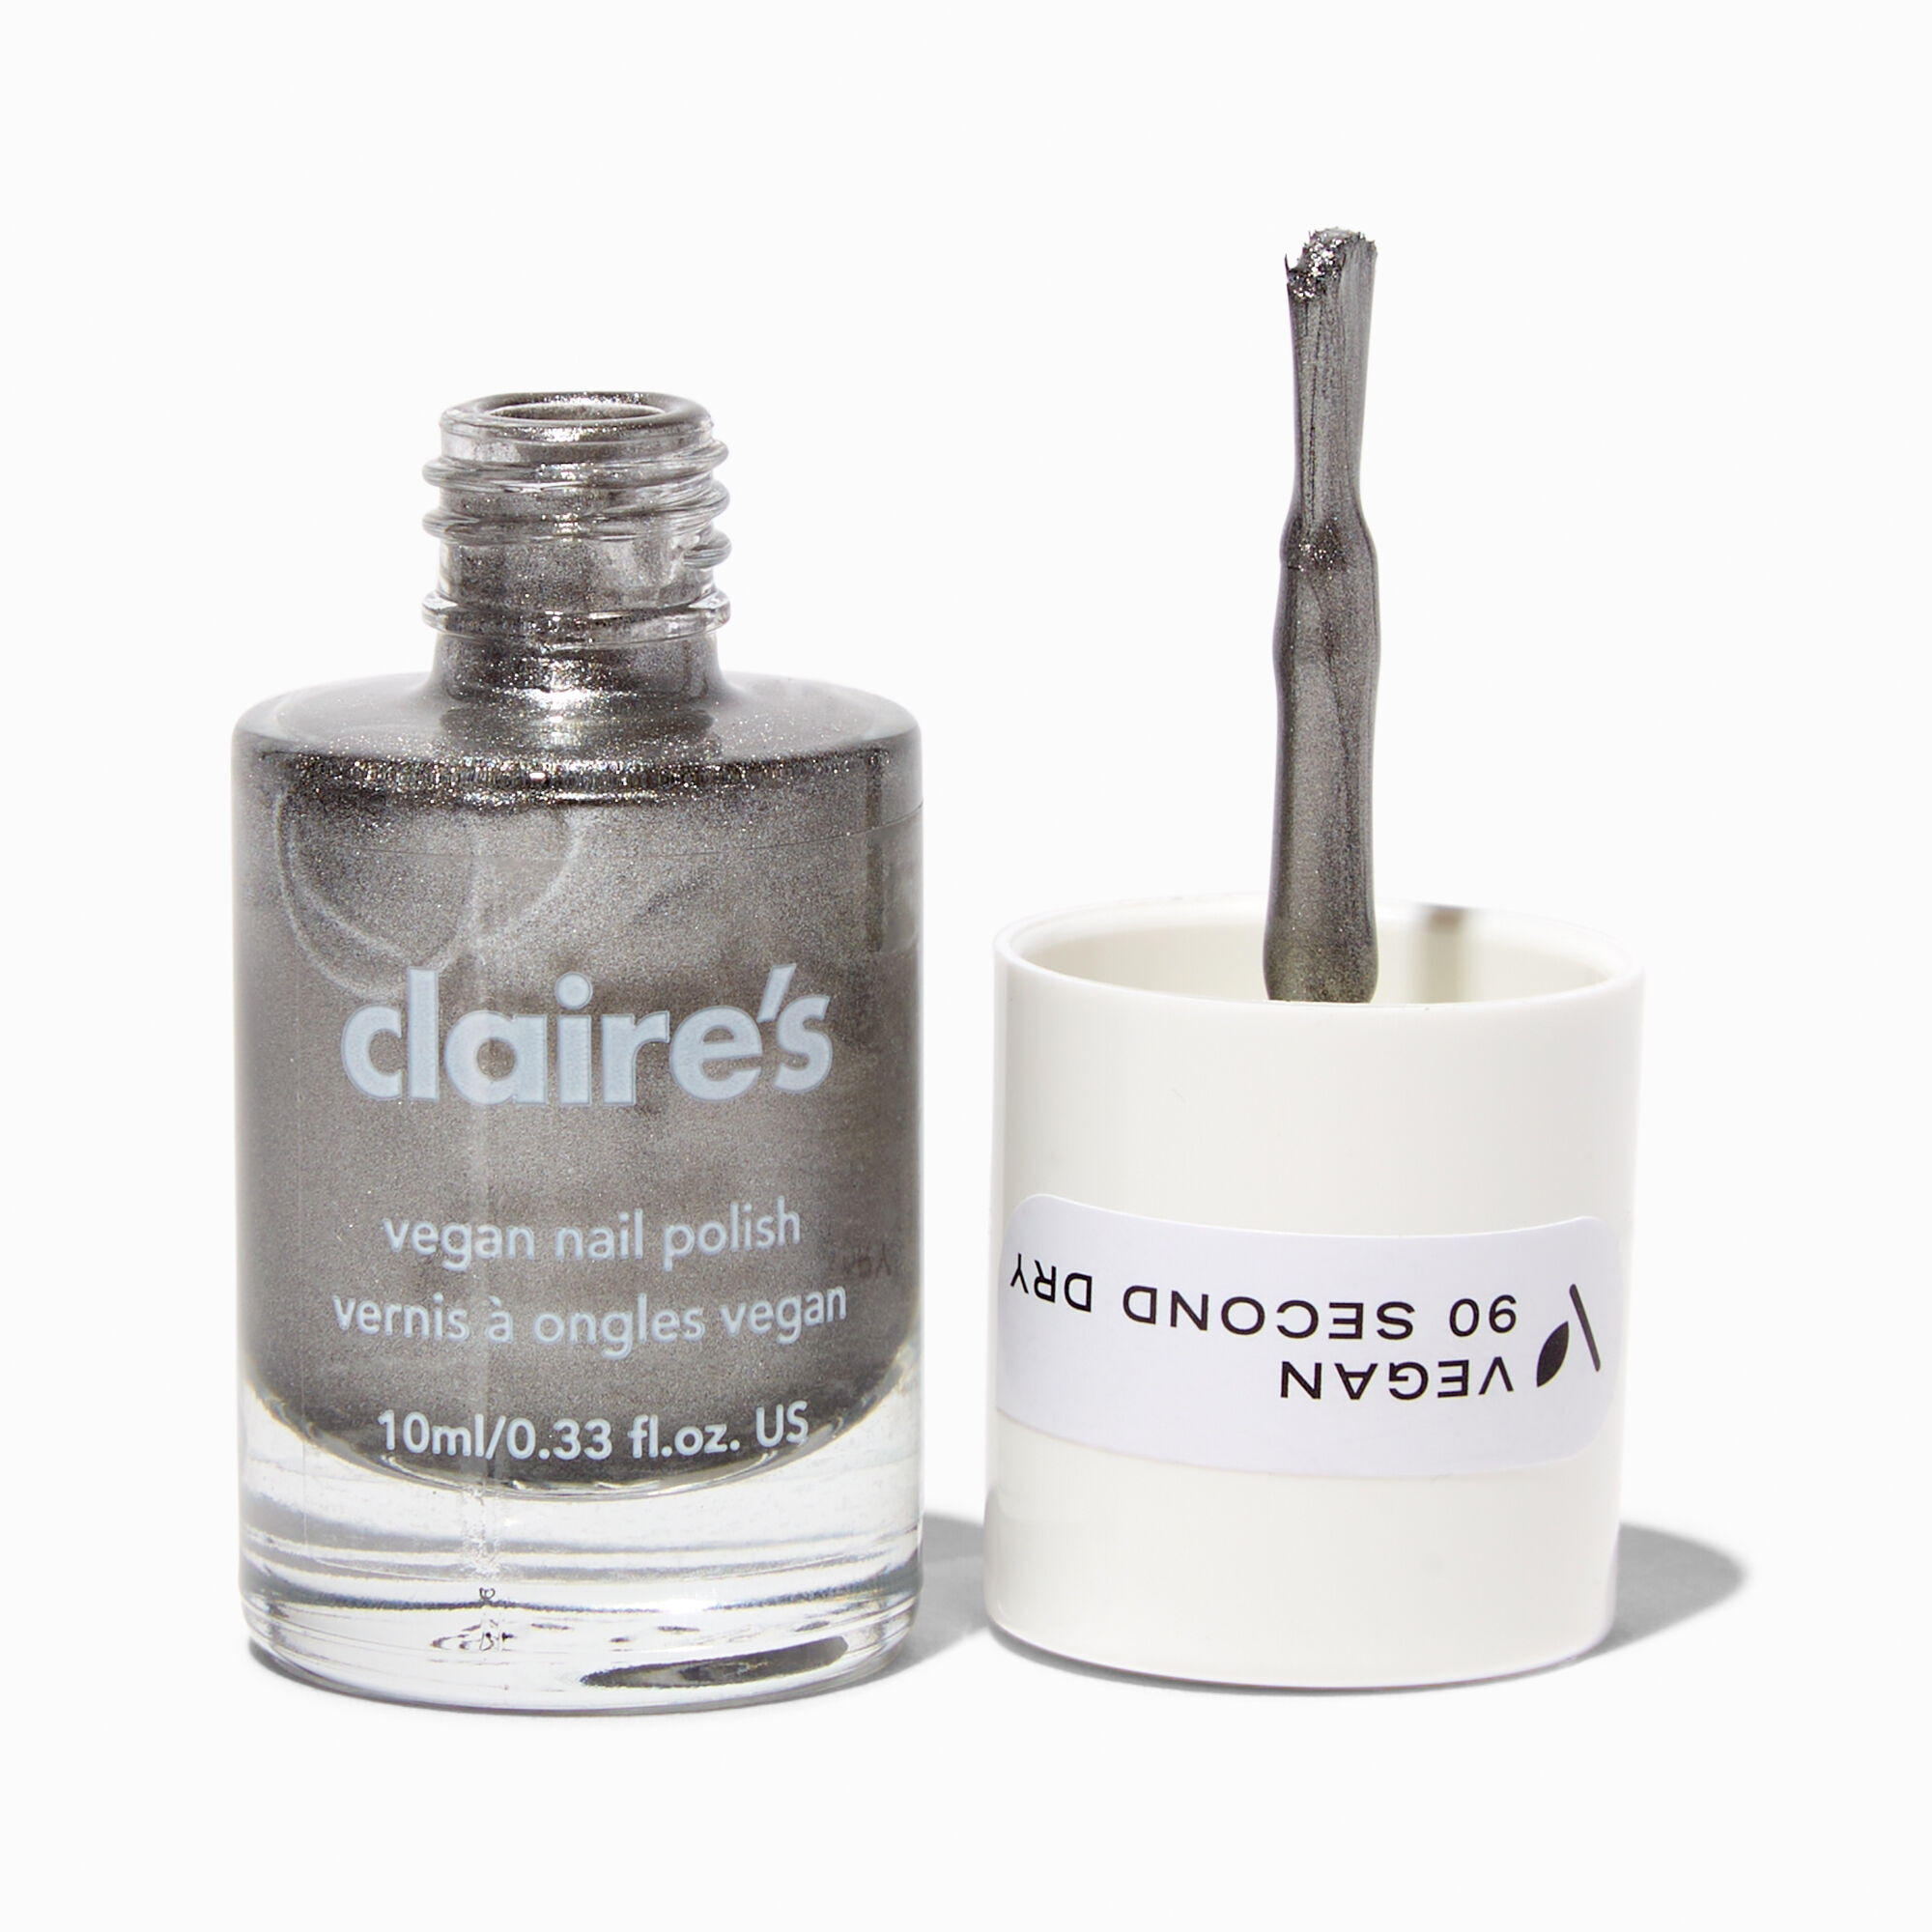 View Claires Vegan 90 Second Dry Nail Polish Chrome Silver information